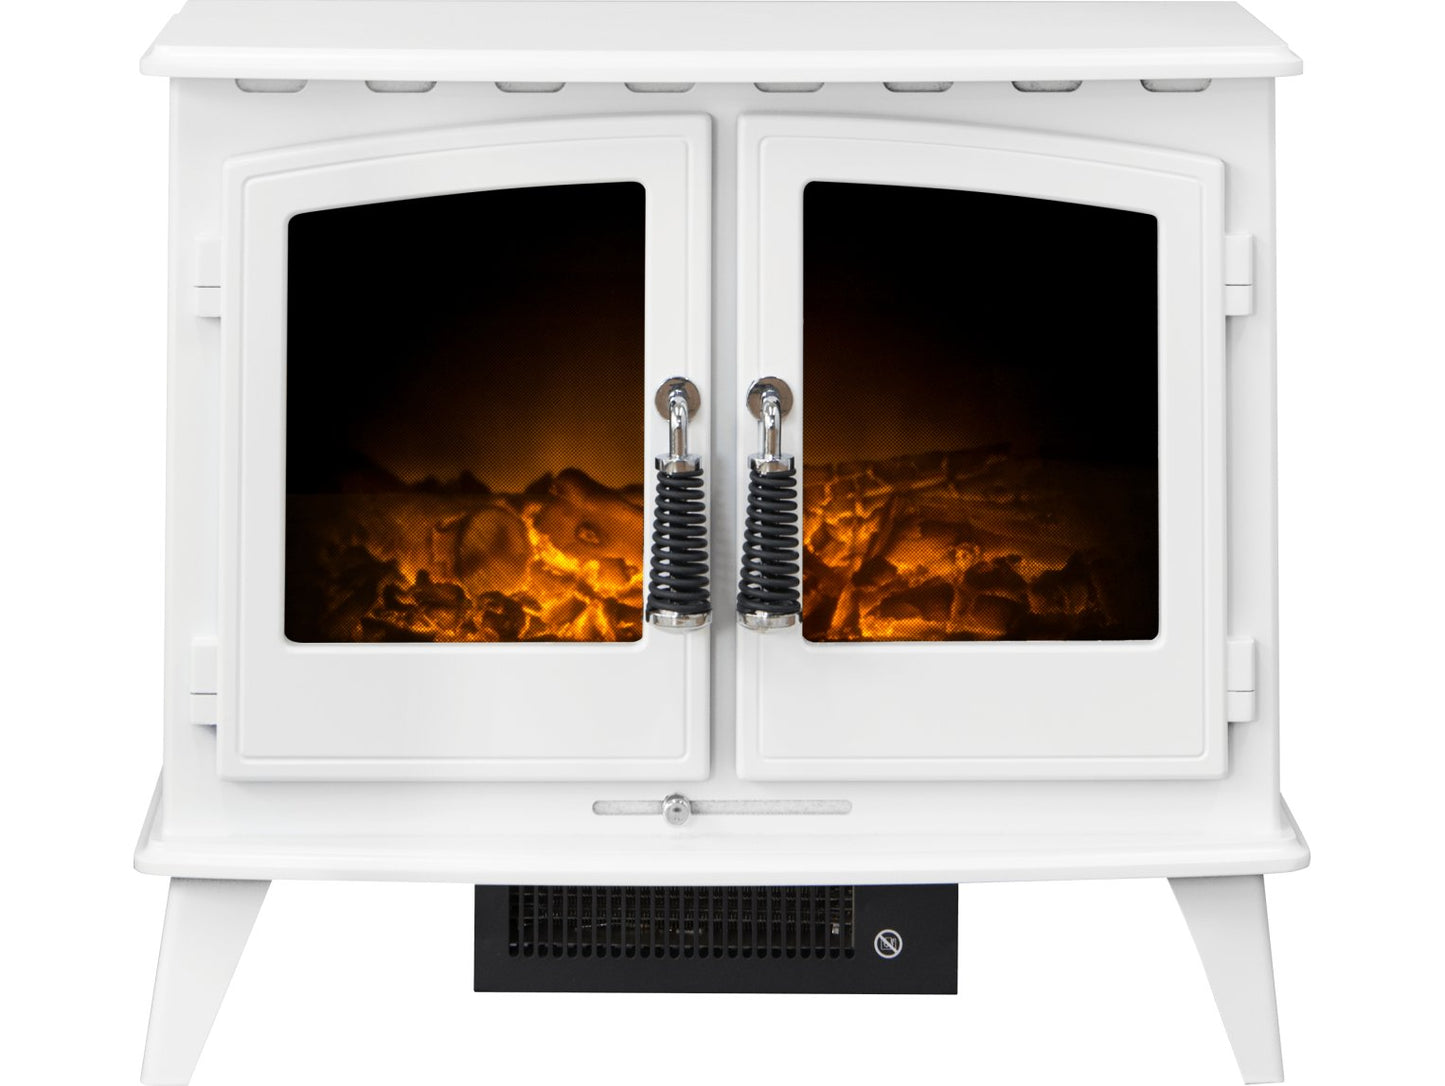 Adam Woodhouse Electric Stove in Pure White